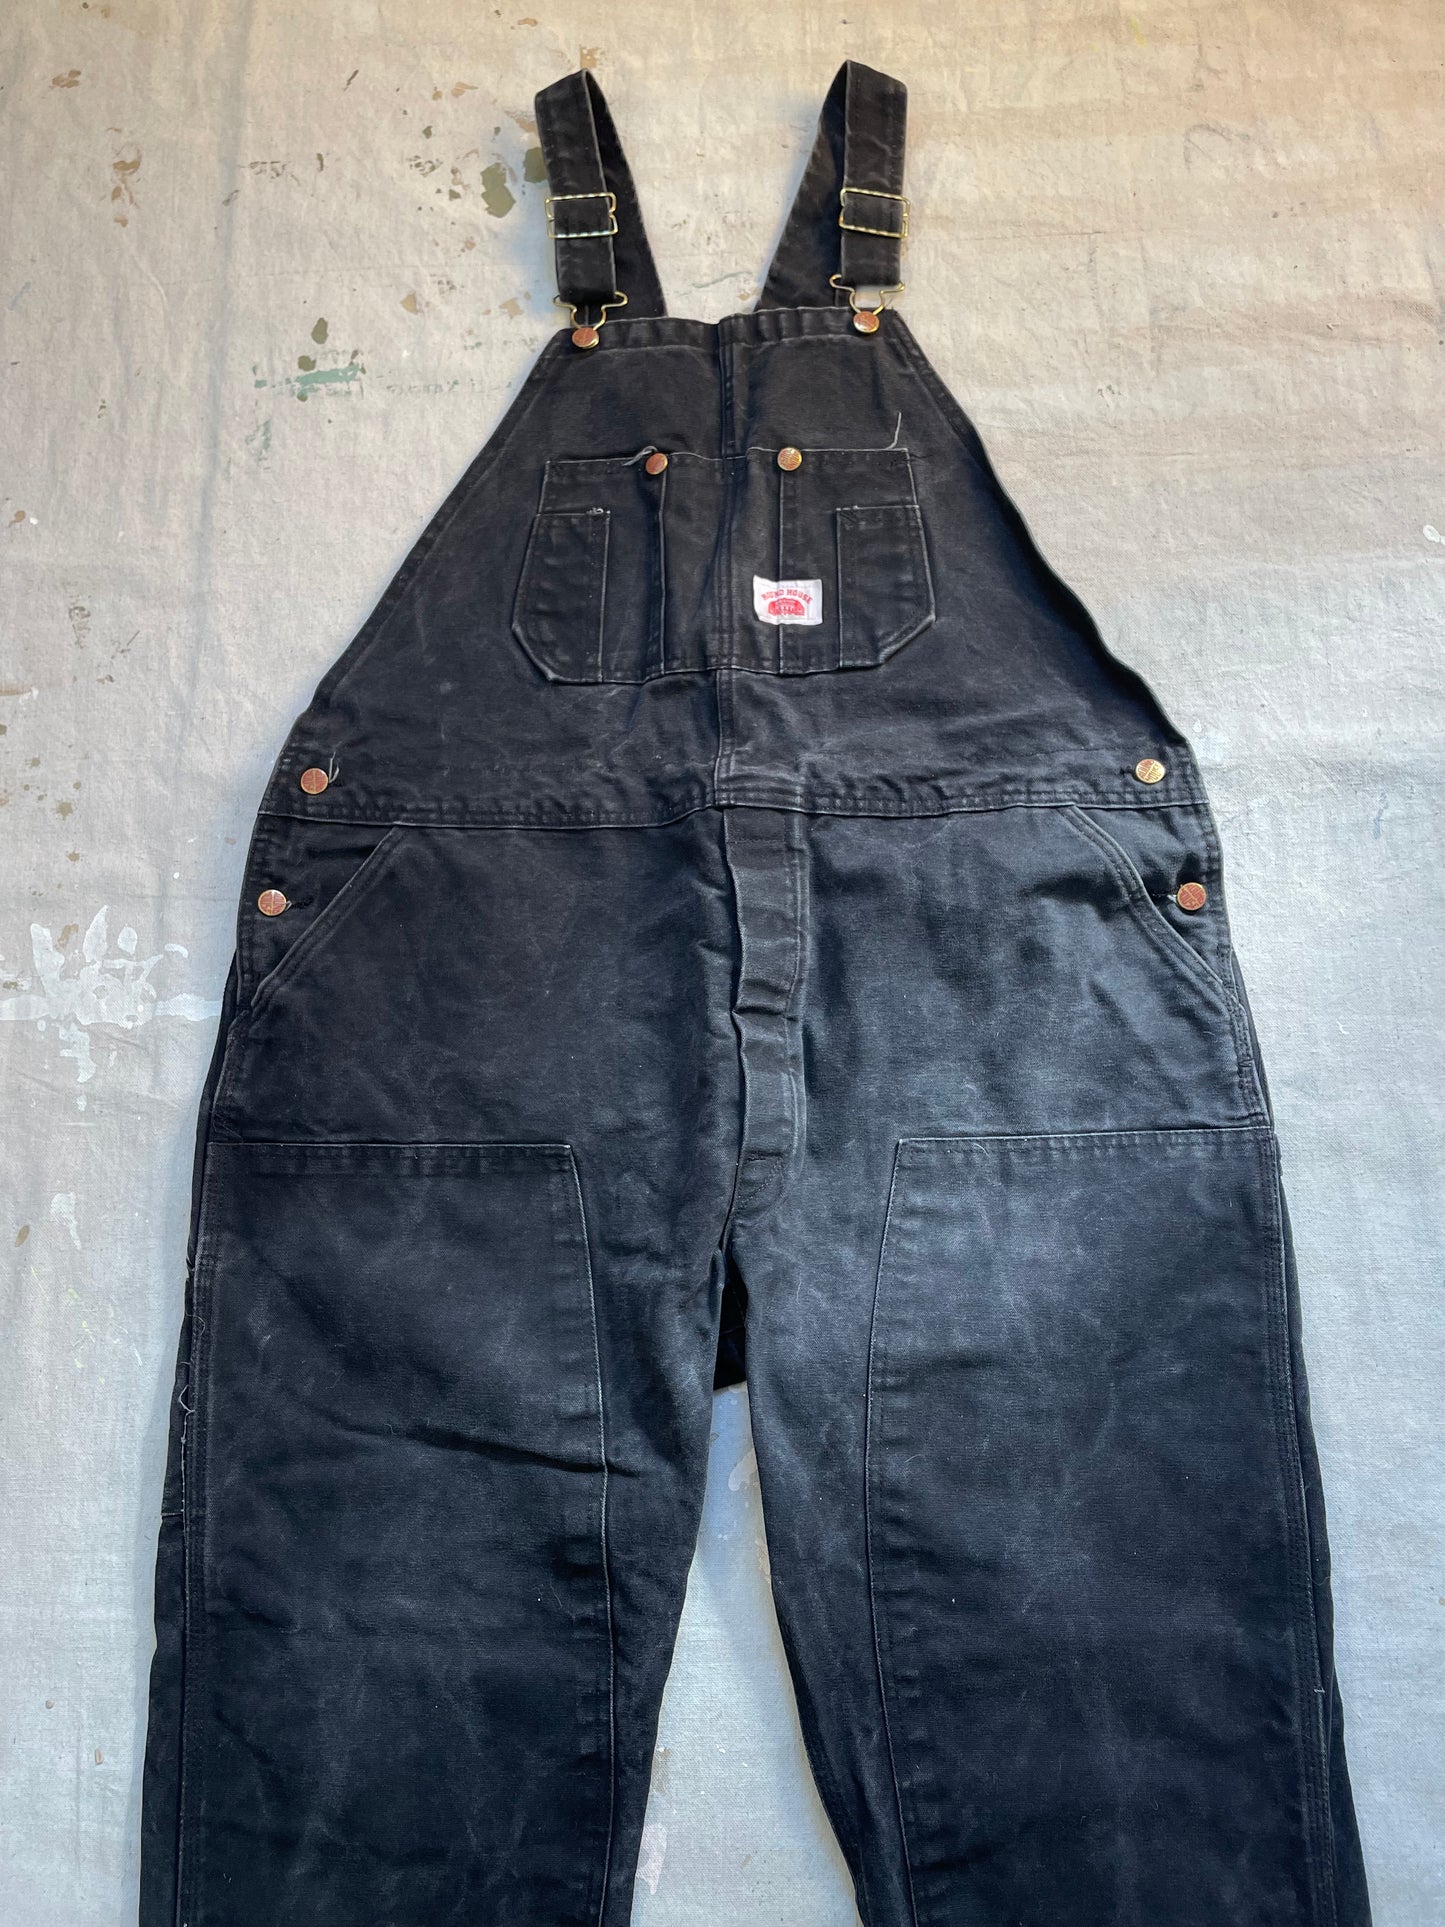 90s Roundhouse Black Double Knee Overalls